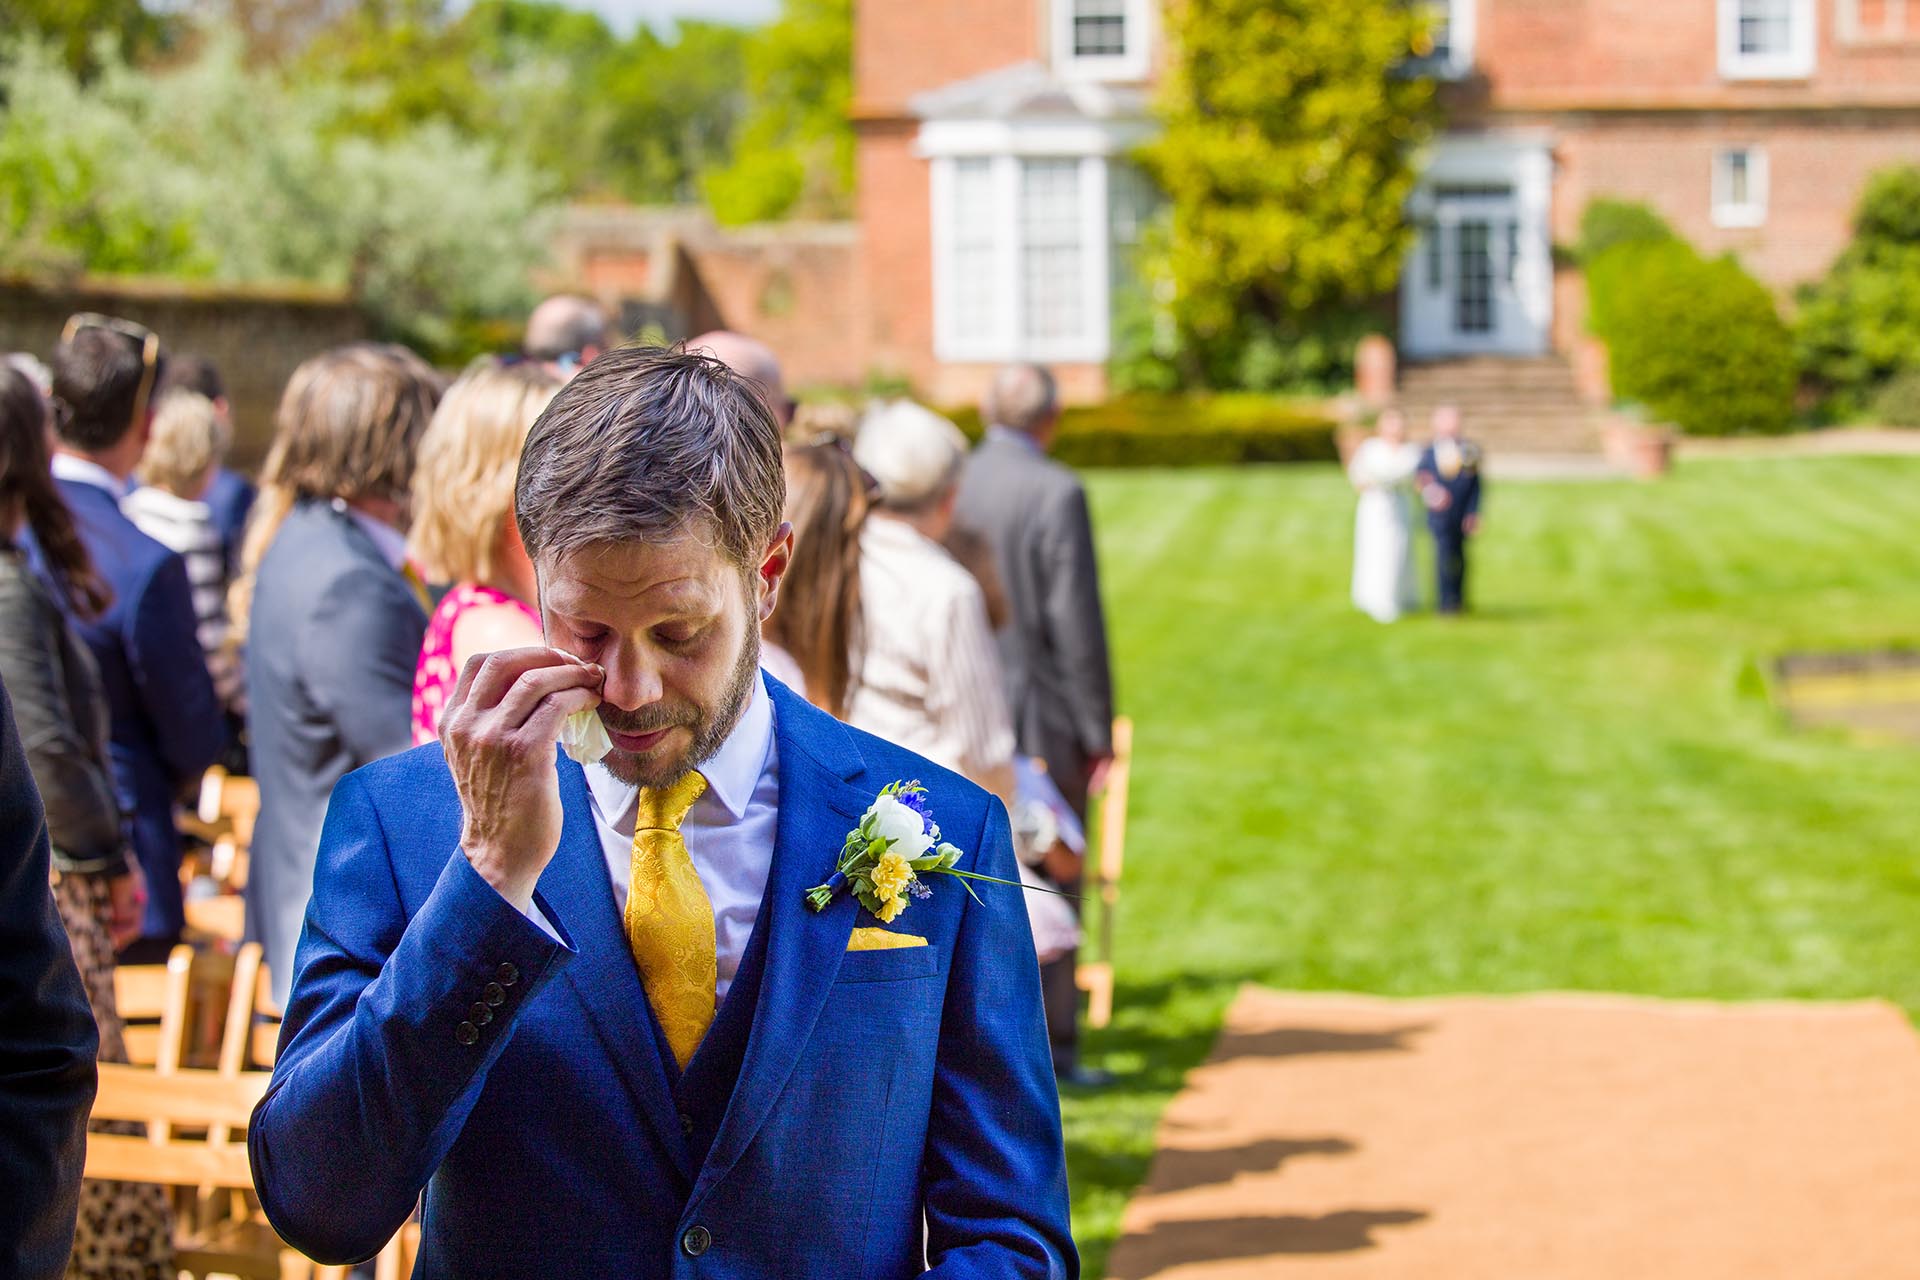 Essex wedding photographer at Great Lodge, Great Bardfield